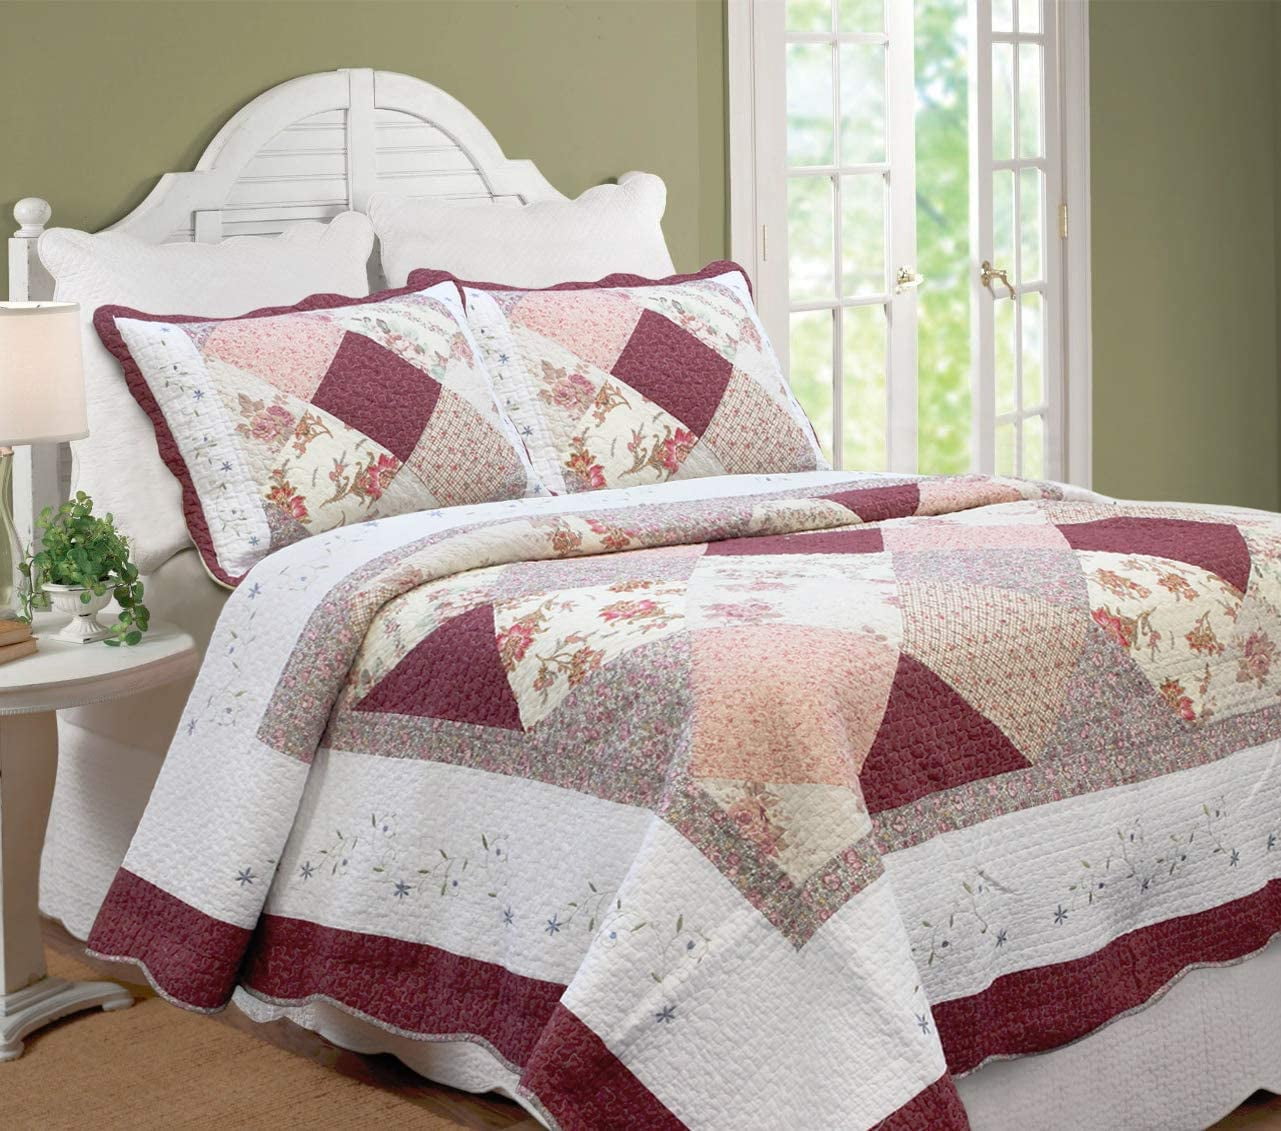 BEAUTIFUL CLASSIC COZY COTTAGE SCALLOPED CREAM IVORY OFF WHITE SOFT QUILT SET 